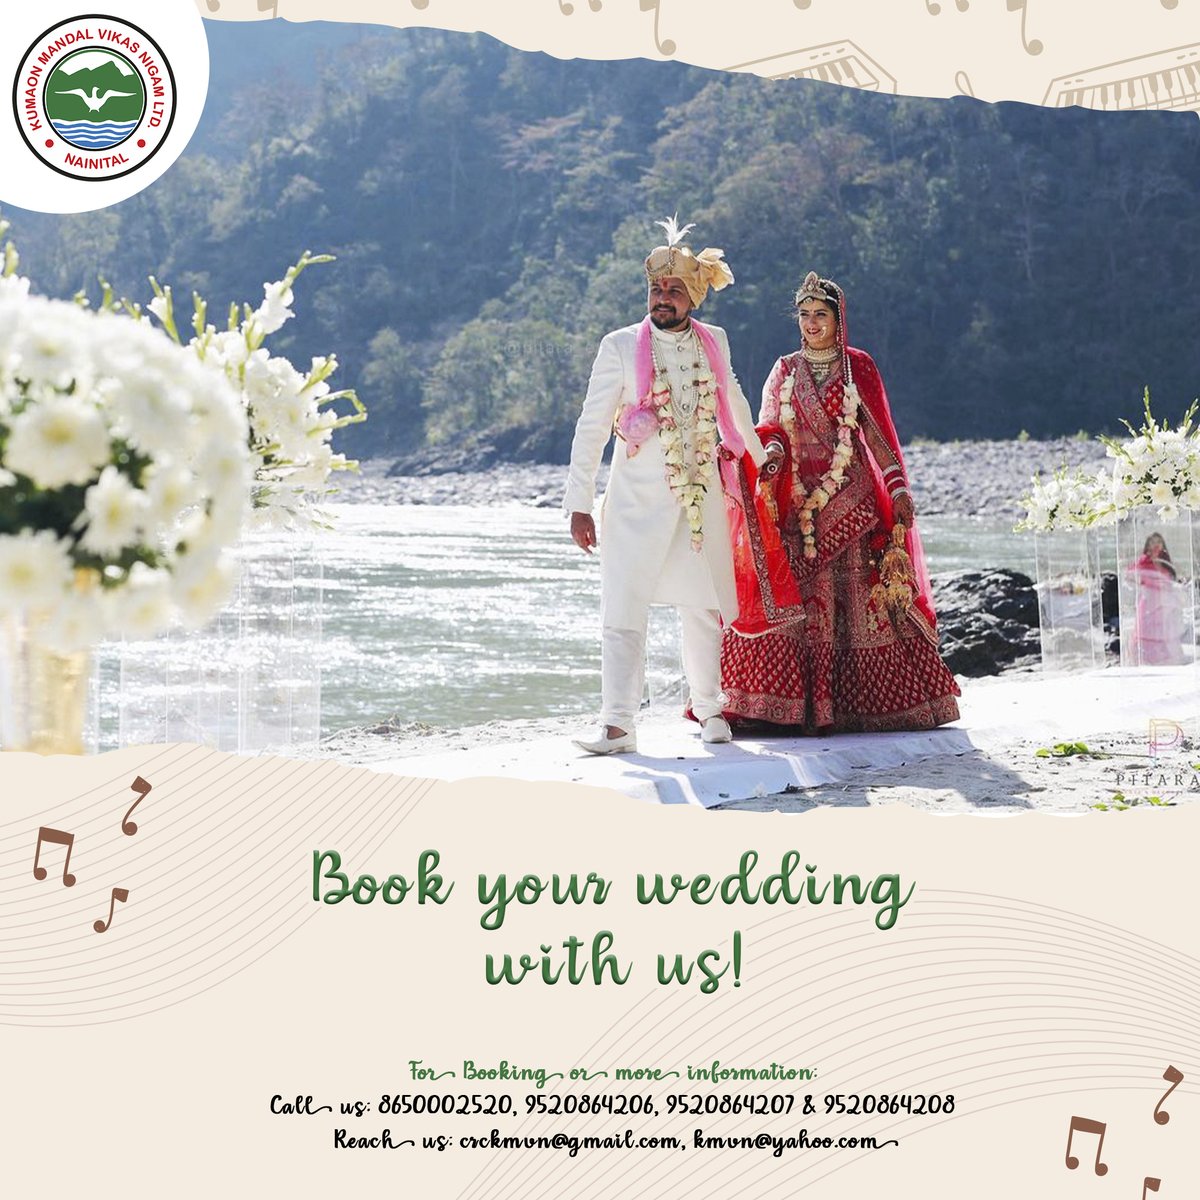 Kumaon is a popular wedding destination that offers a peaceful environment, pleasant climate, and snow-covered mountains. So, Come together in the perfect destination, to start your life with imagination. #uttarakhandtourism #uttarakhand @UTDBofficial